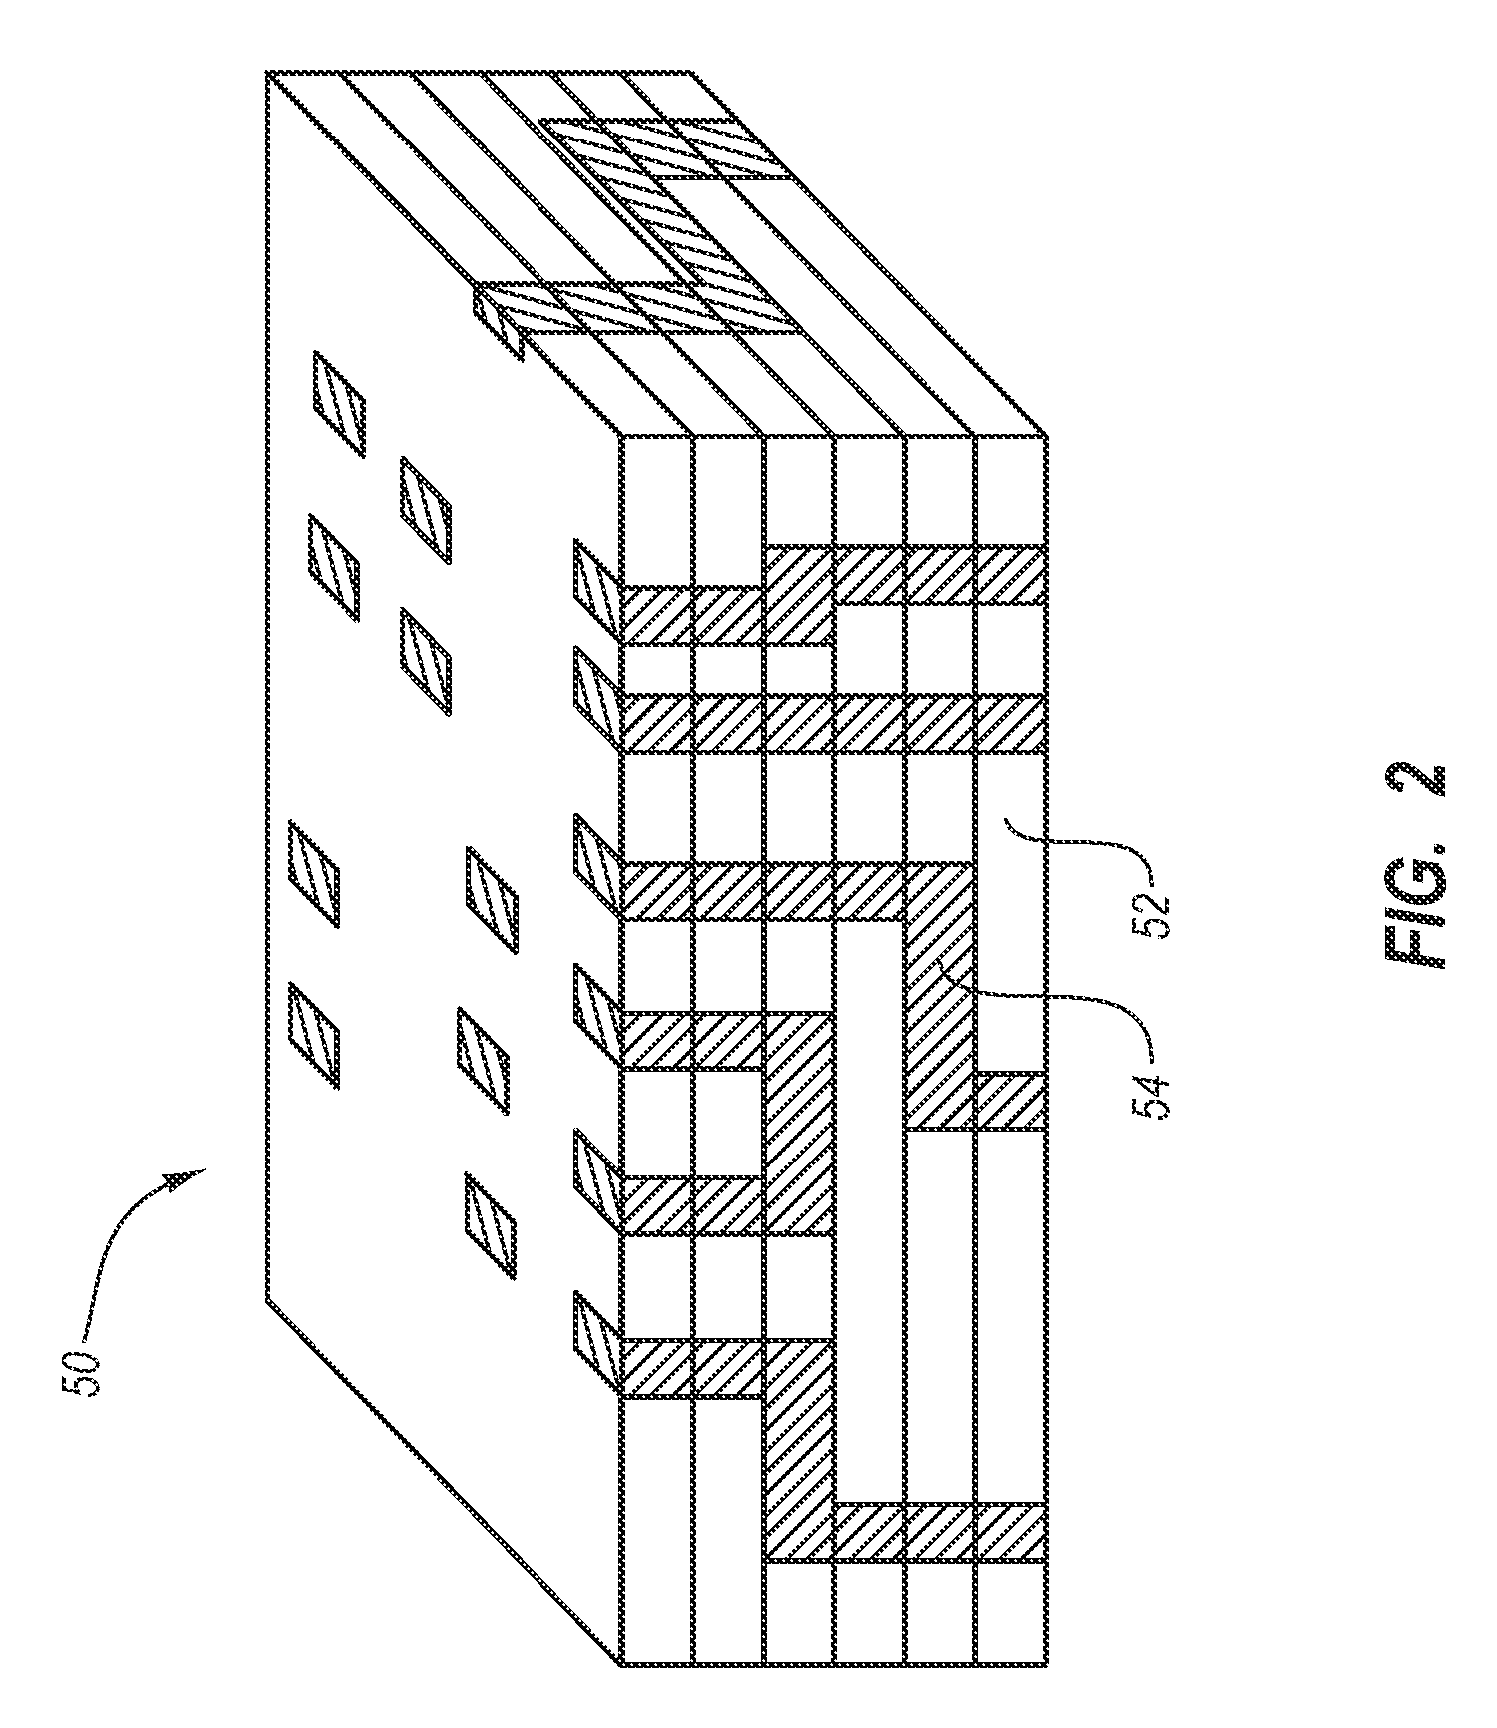 Methods of using medical devices for controlled drug release